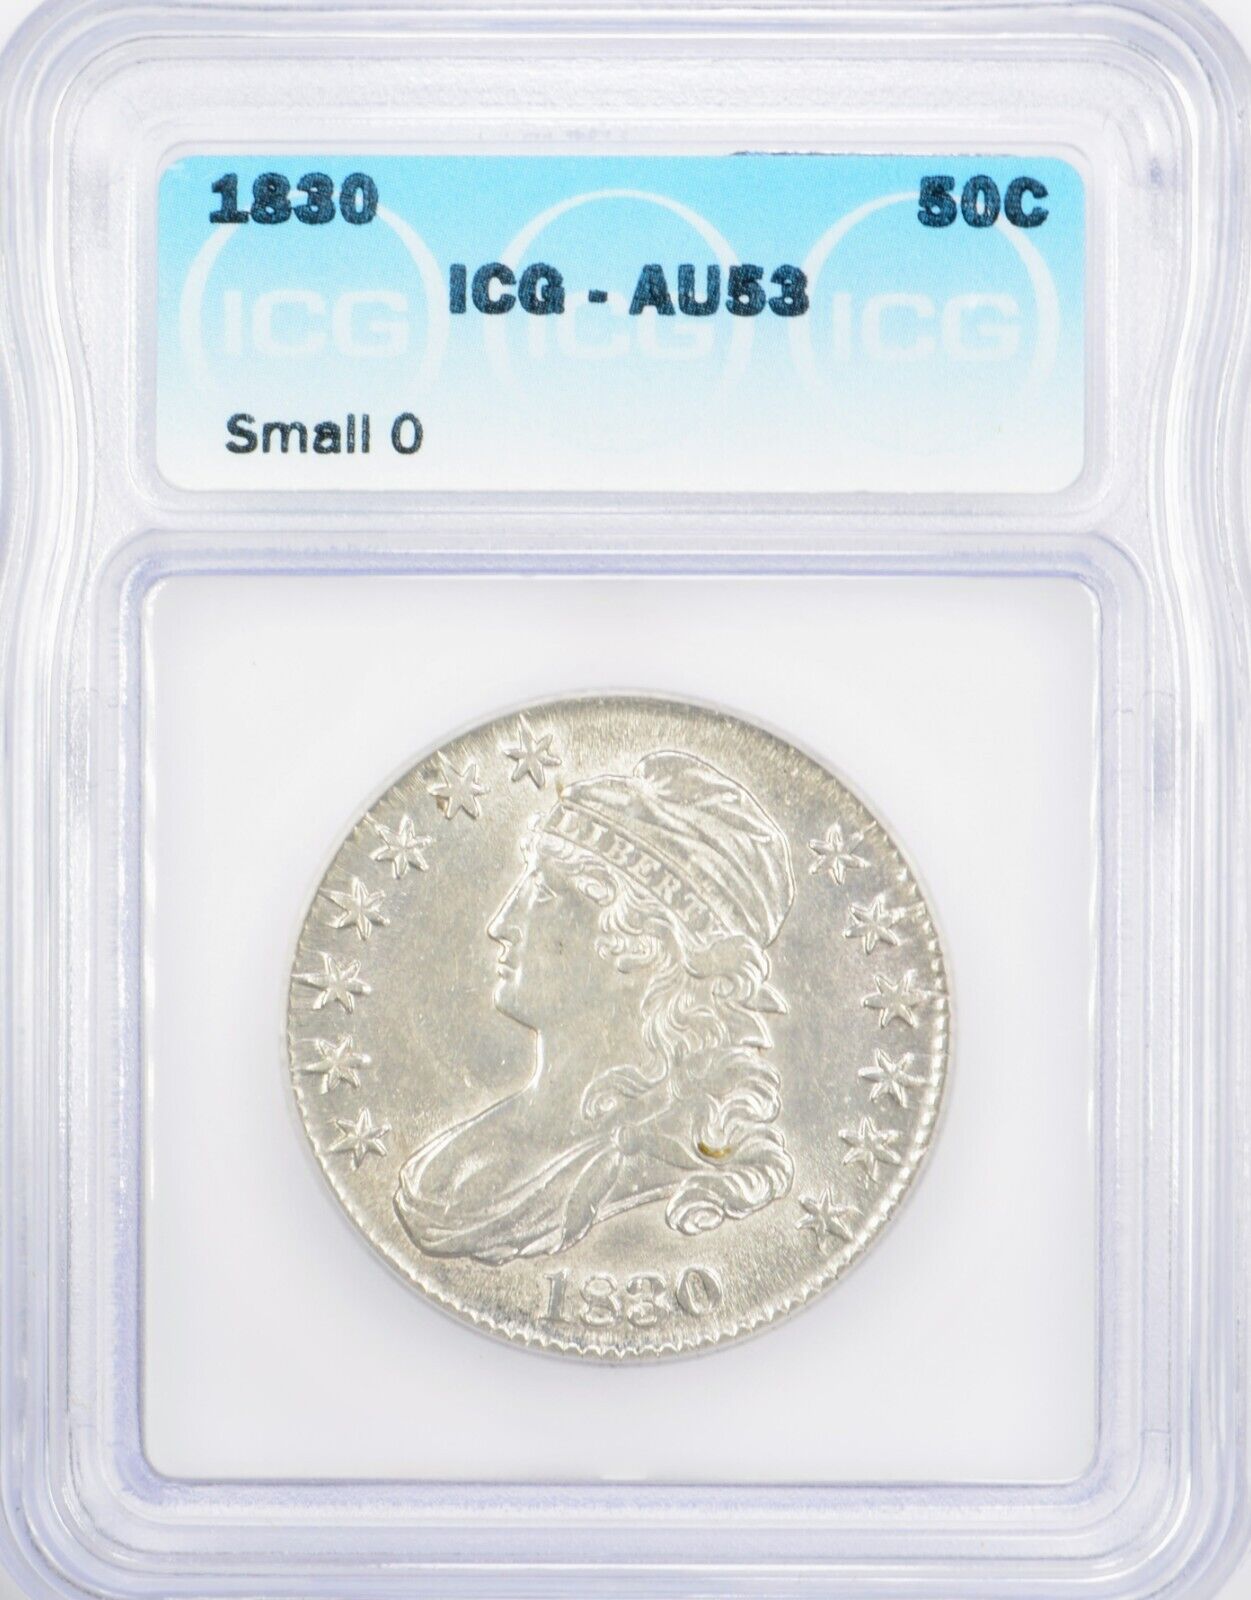 1830 Capped Bust Half Dollar 50c - Icg Au53 - Small O Variety - Free Shipping!